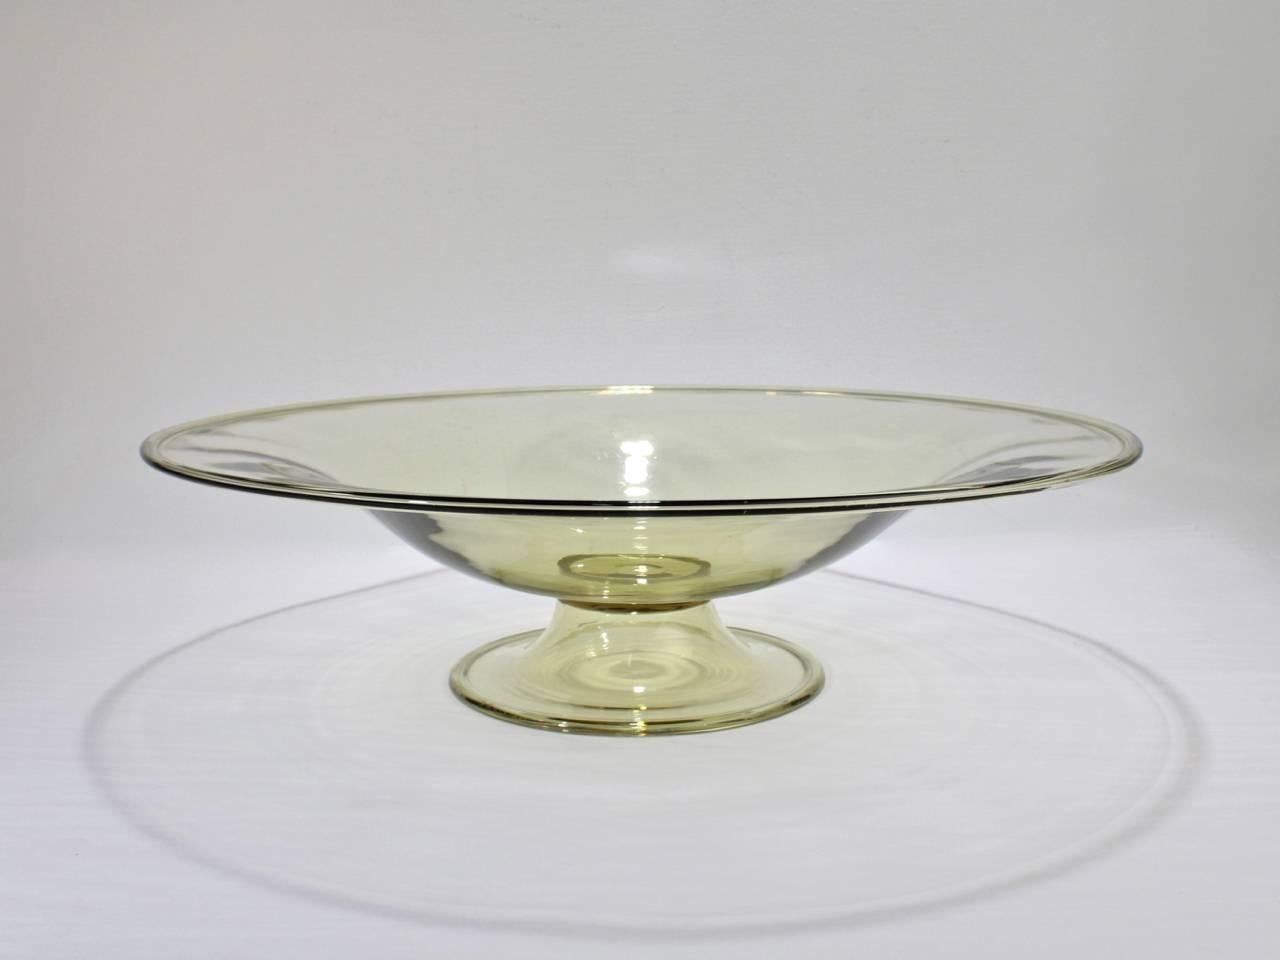 A very large midcentury Murano or Venetian amber color glass footed bowl.

Perfect as a table centerpiece.

Likely by Salviati.

Measure: Diameter ca. 16 3/4 in.

Items purchased from David Sterner Antiques must delight you. Purchases may be